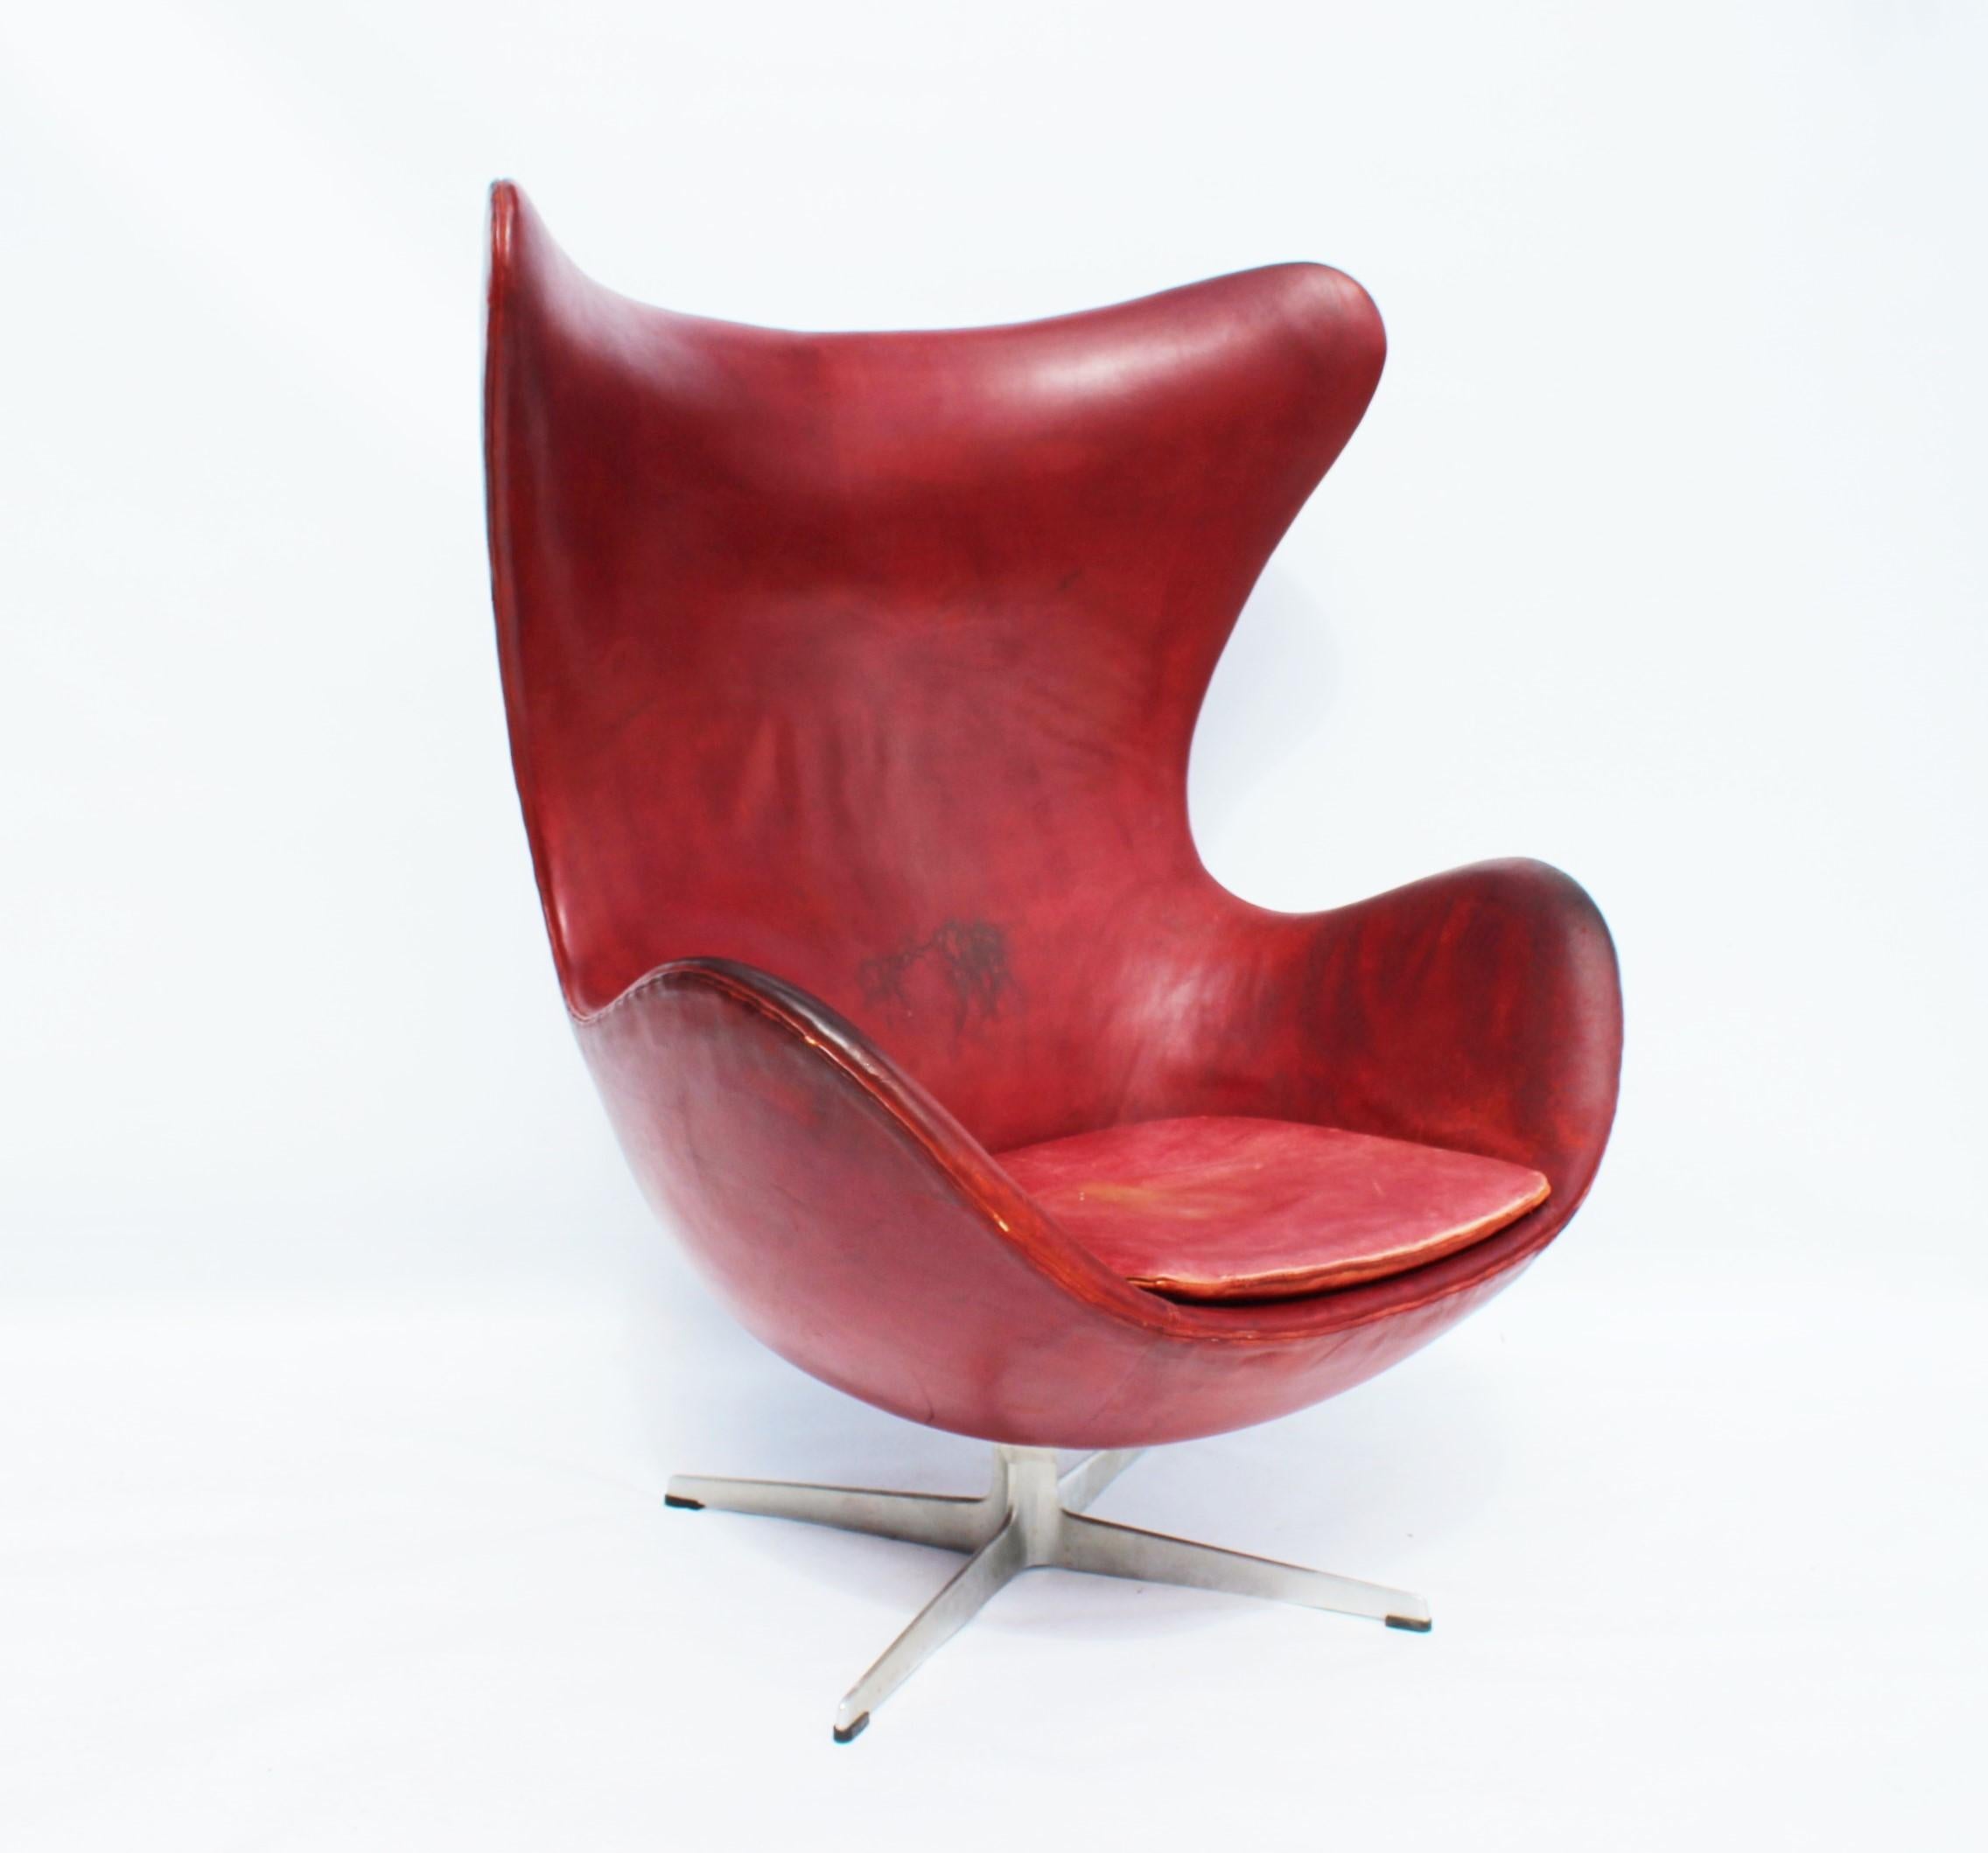 The egg, model 3316, designed by Arne Jacobsen in 1958 and manufactured by Fritz Hansen in 1963. The chair is with original patinated upholstery with red elegance leather and is in great vintage condition. The egg is with the swivel function.